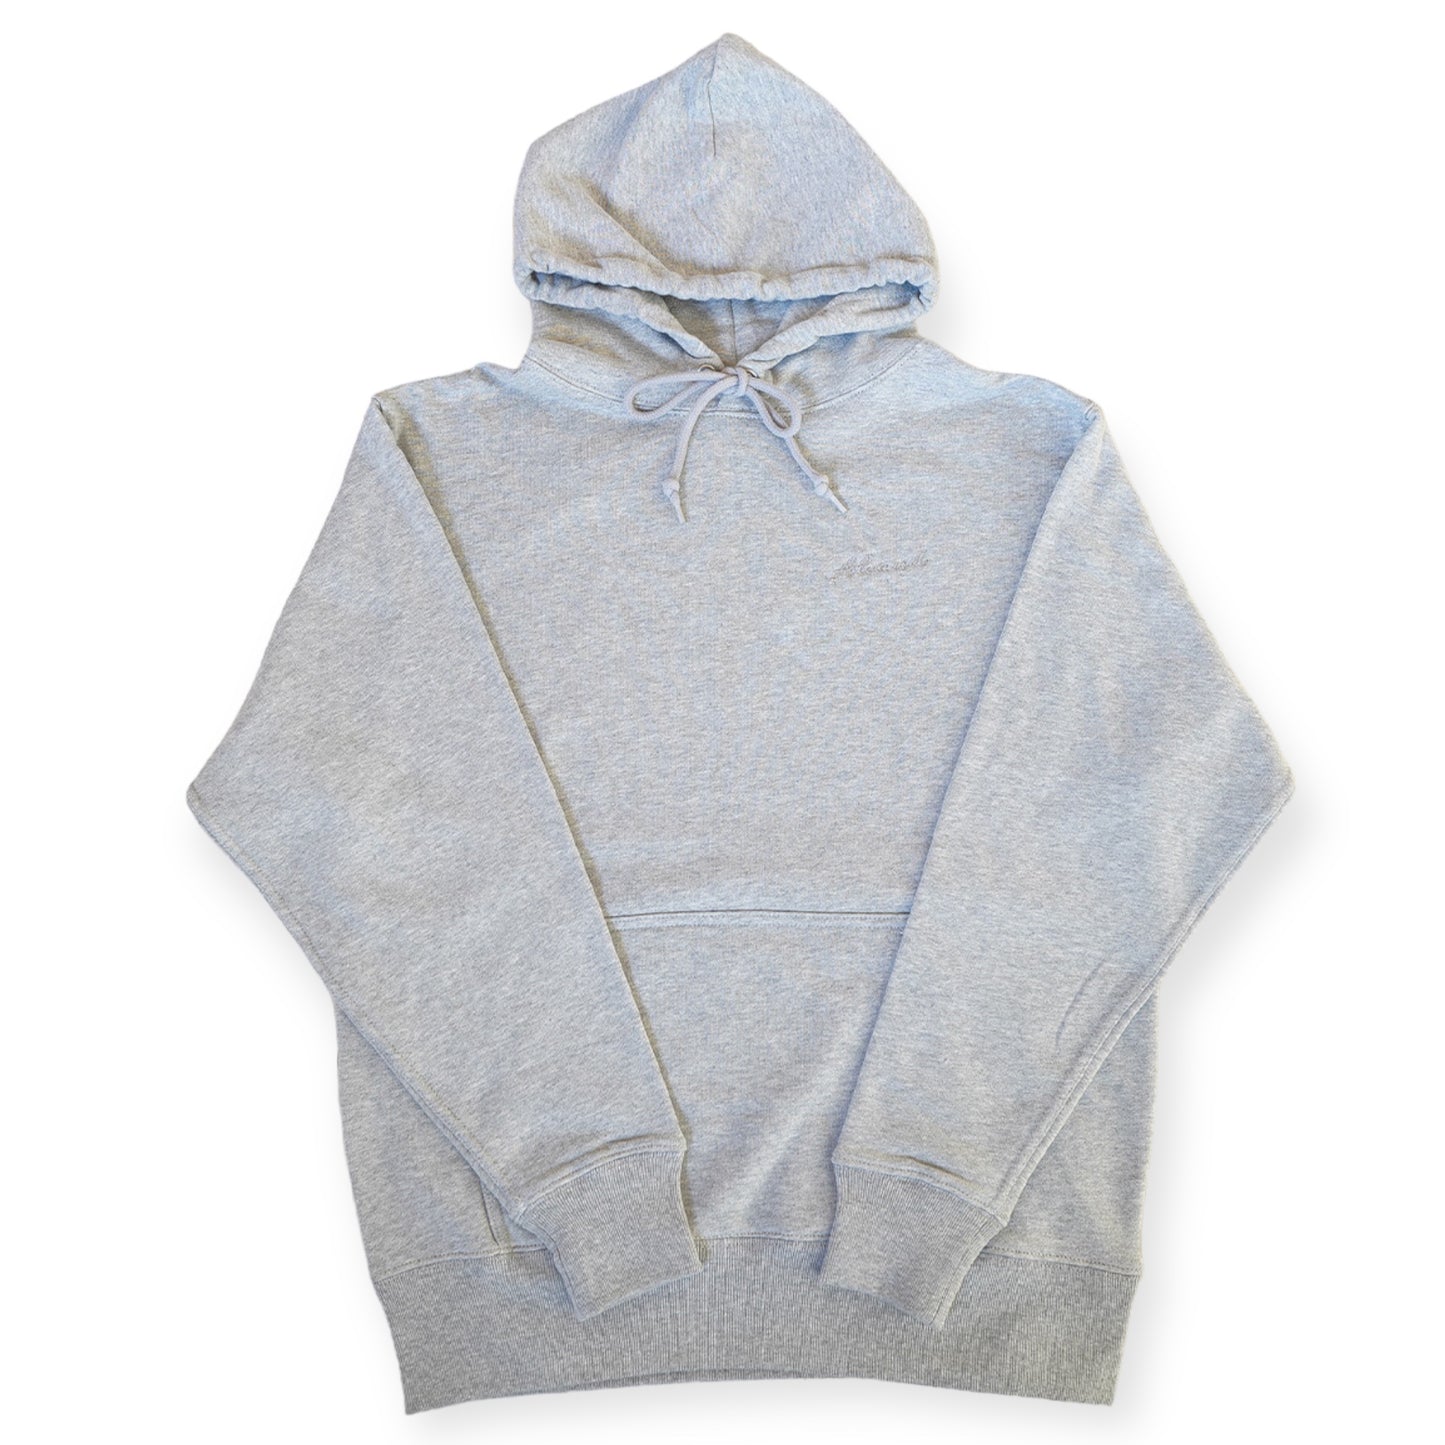 ABAND RECOVERY HOODIE 【MIX GRAY】